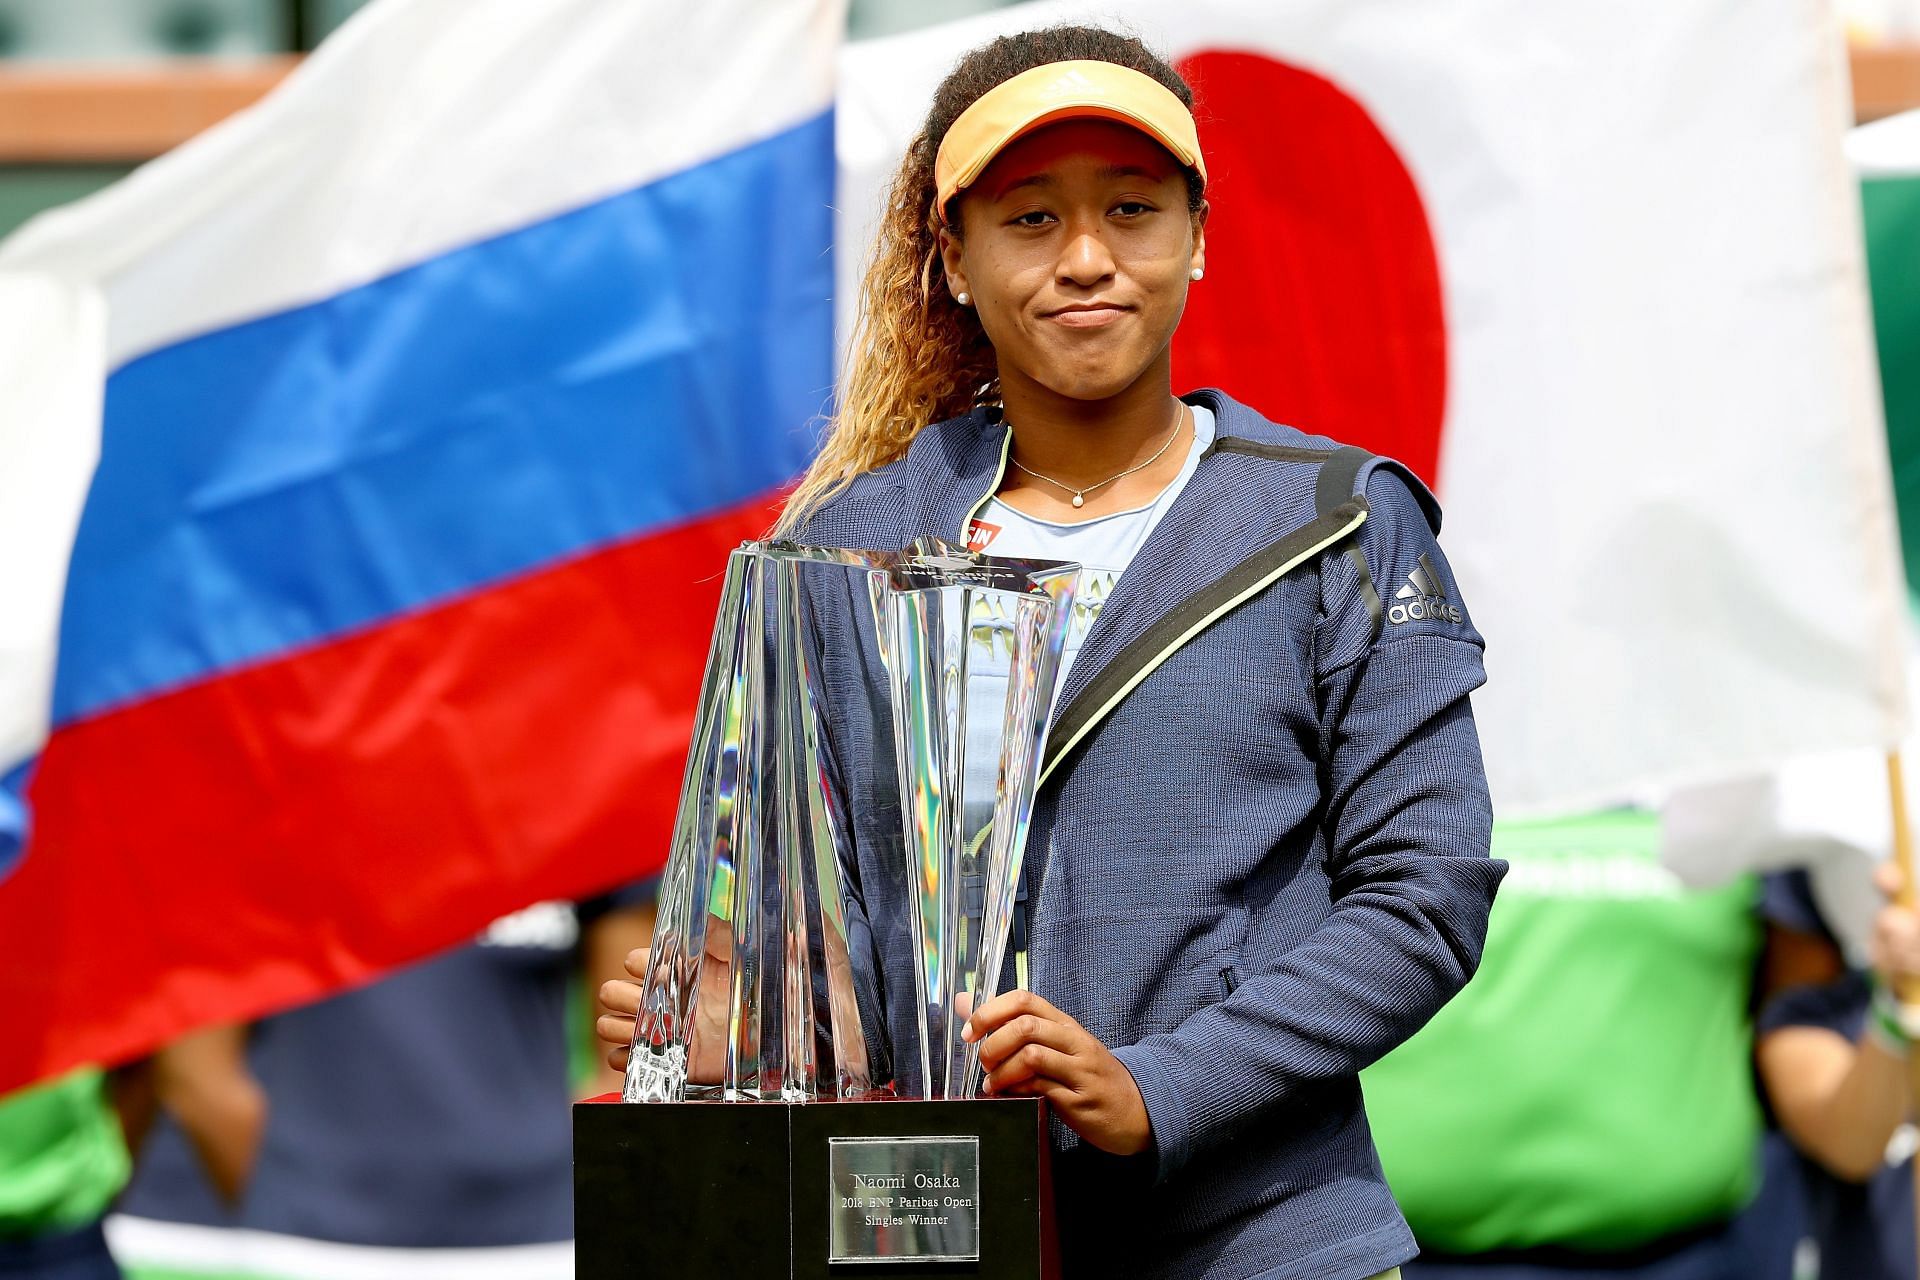 Naomi Osaka won her first ever WTA title at Indian Wells in 2018